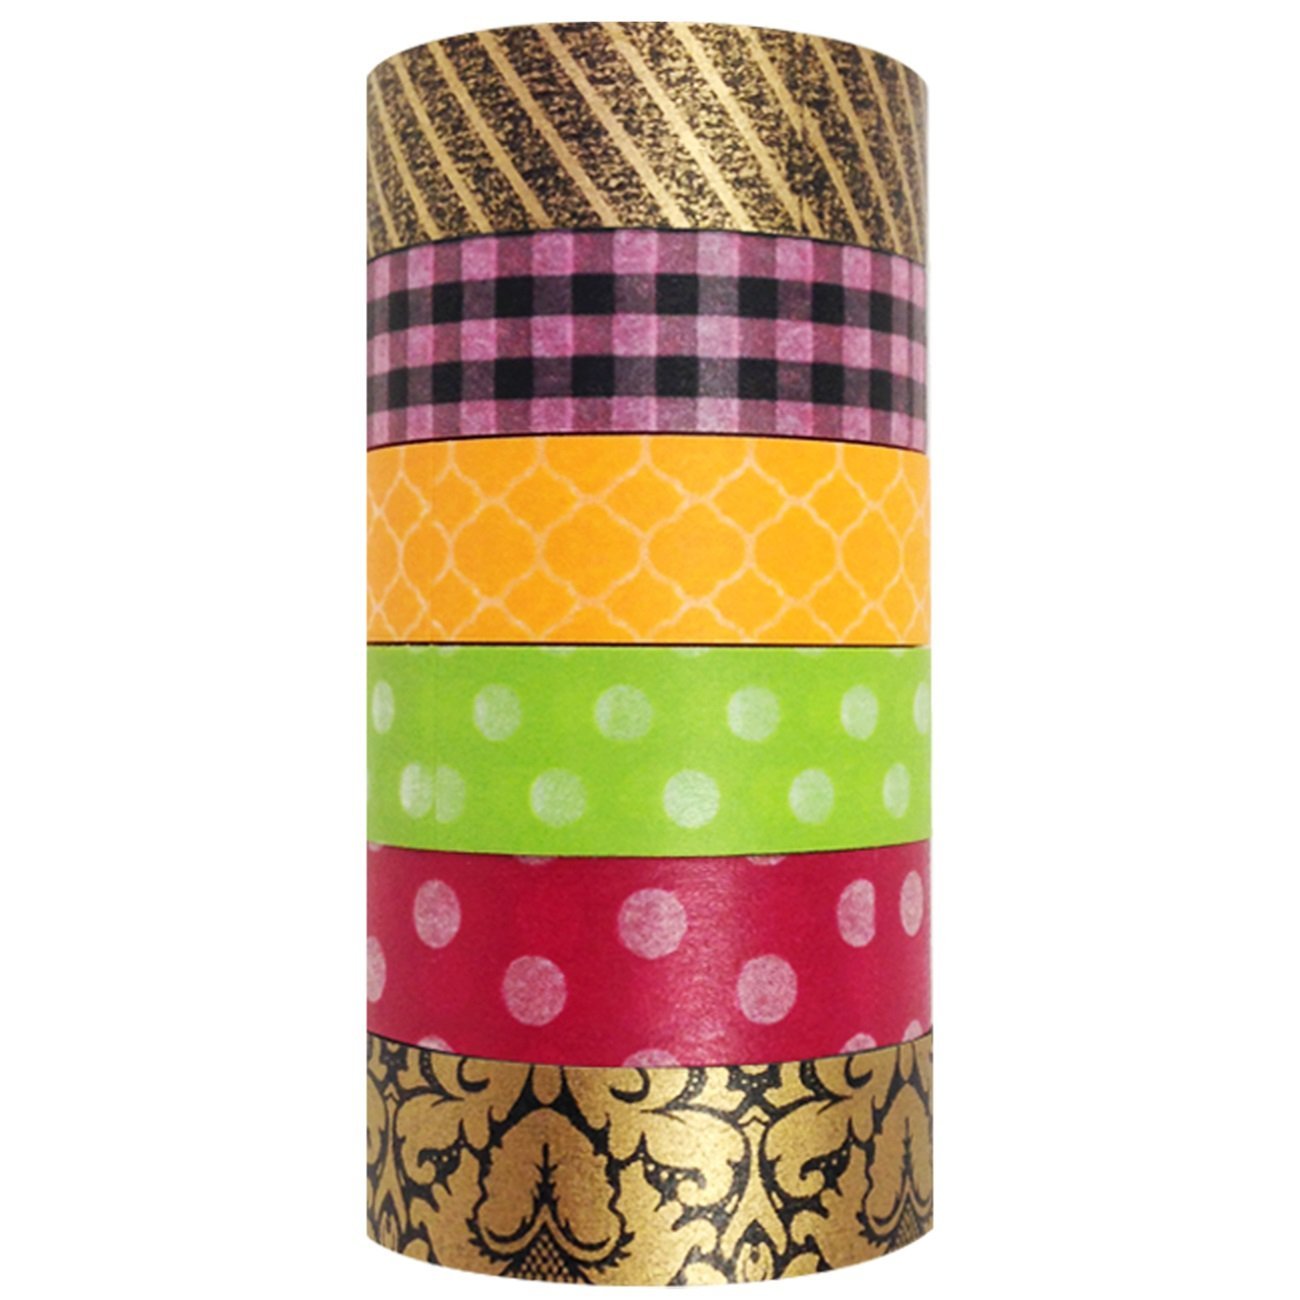 Wrapables Set of 6 Washi Tape + 40 Large Scalloped Multi-Color Gift Tags with Cut Strings